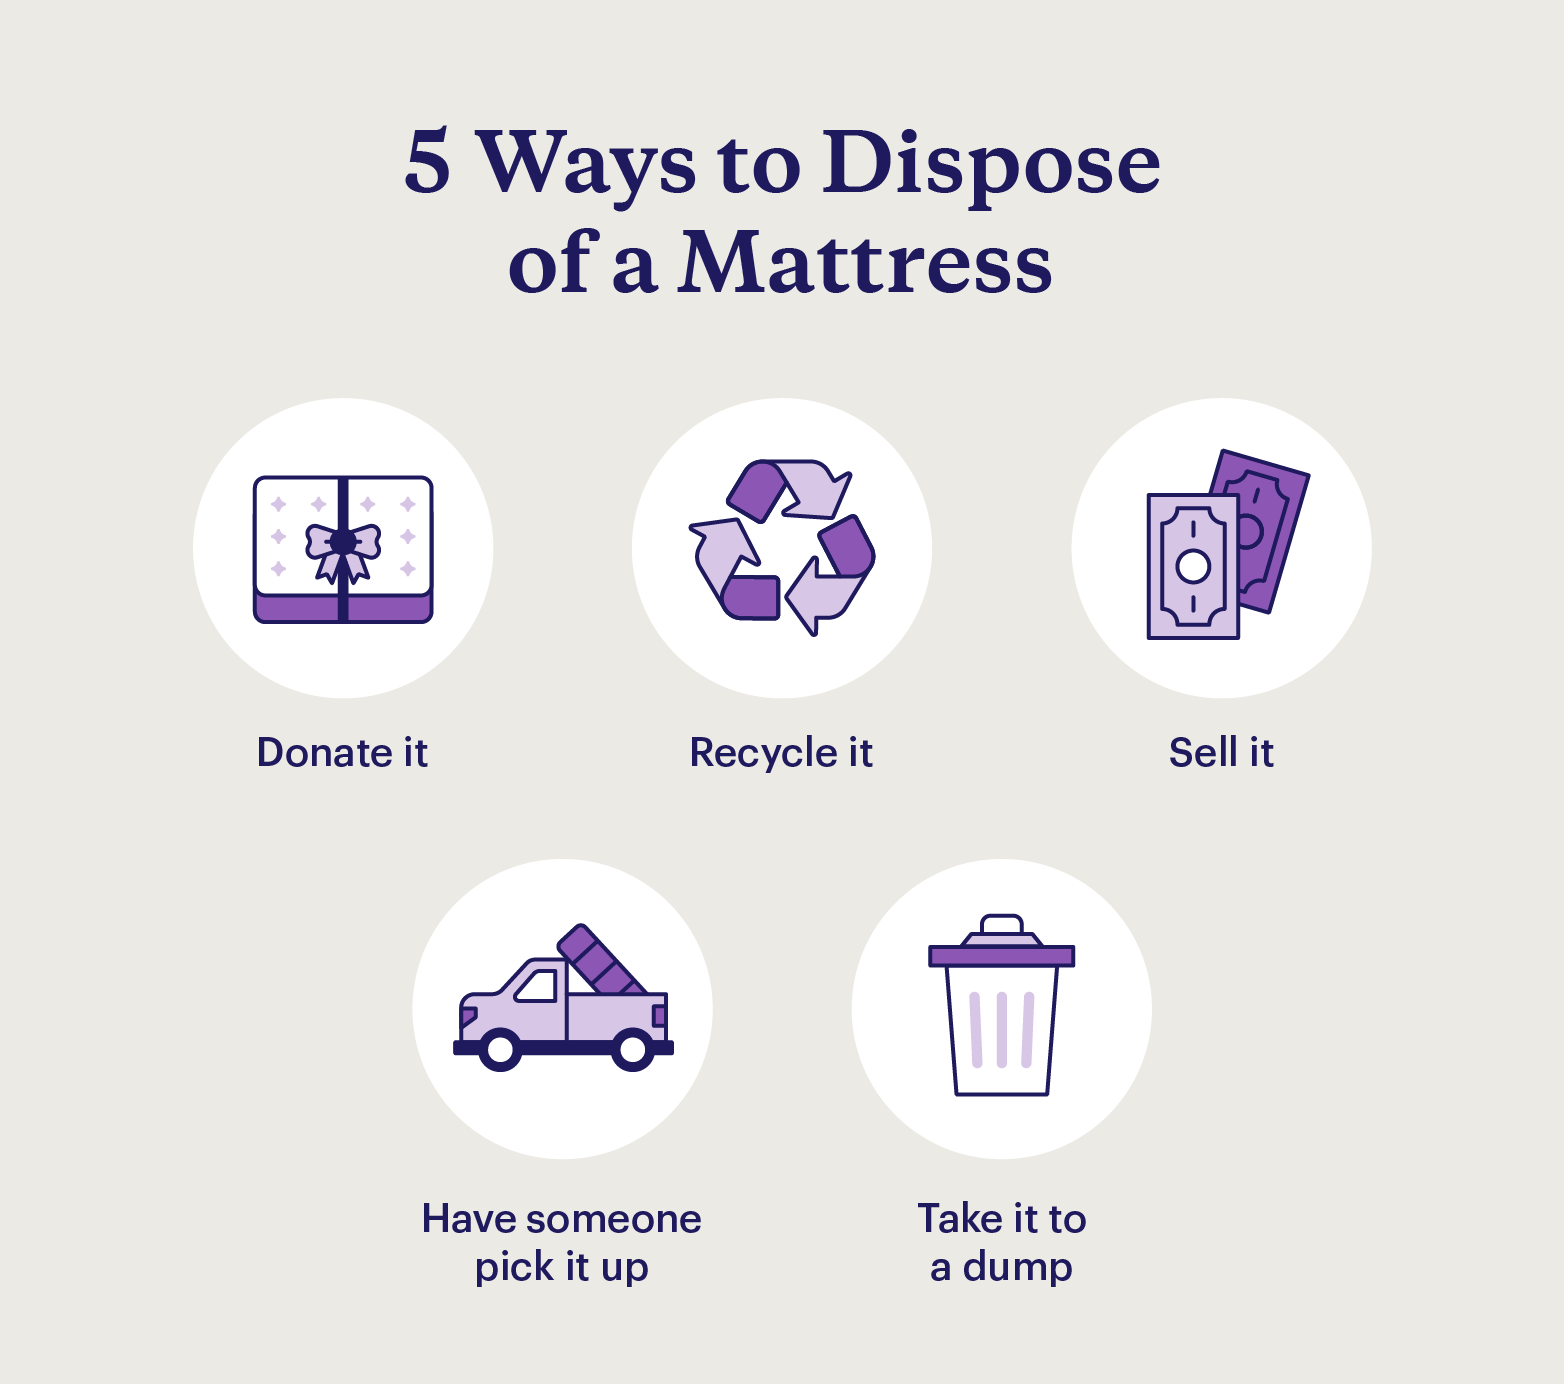 Five ways to dispose of a mattress, including donation, recycling, selling, look into mattress removal companies, and taking it to a dump.